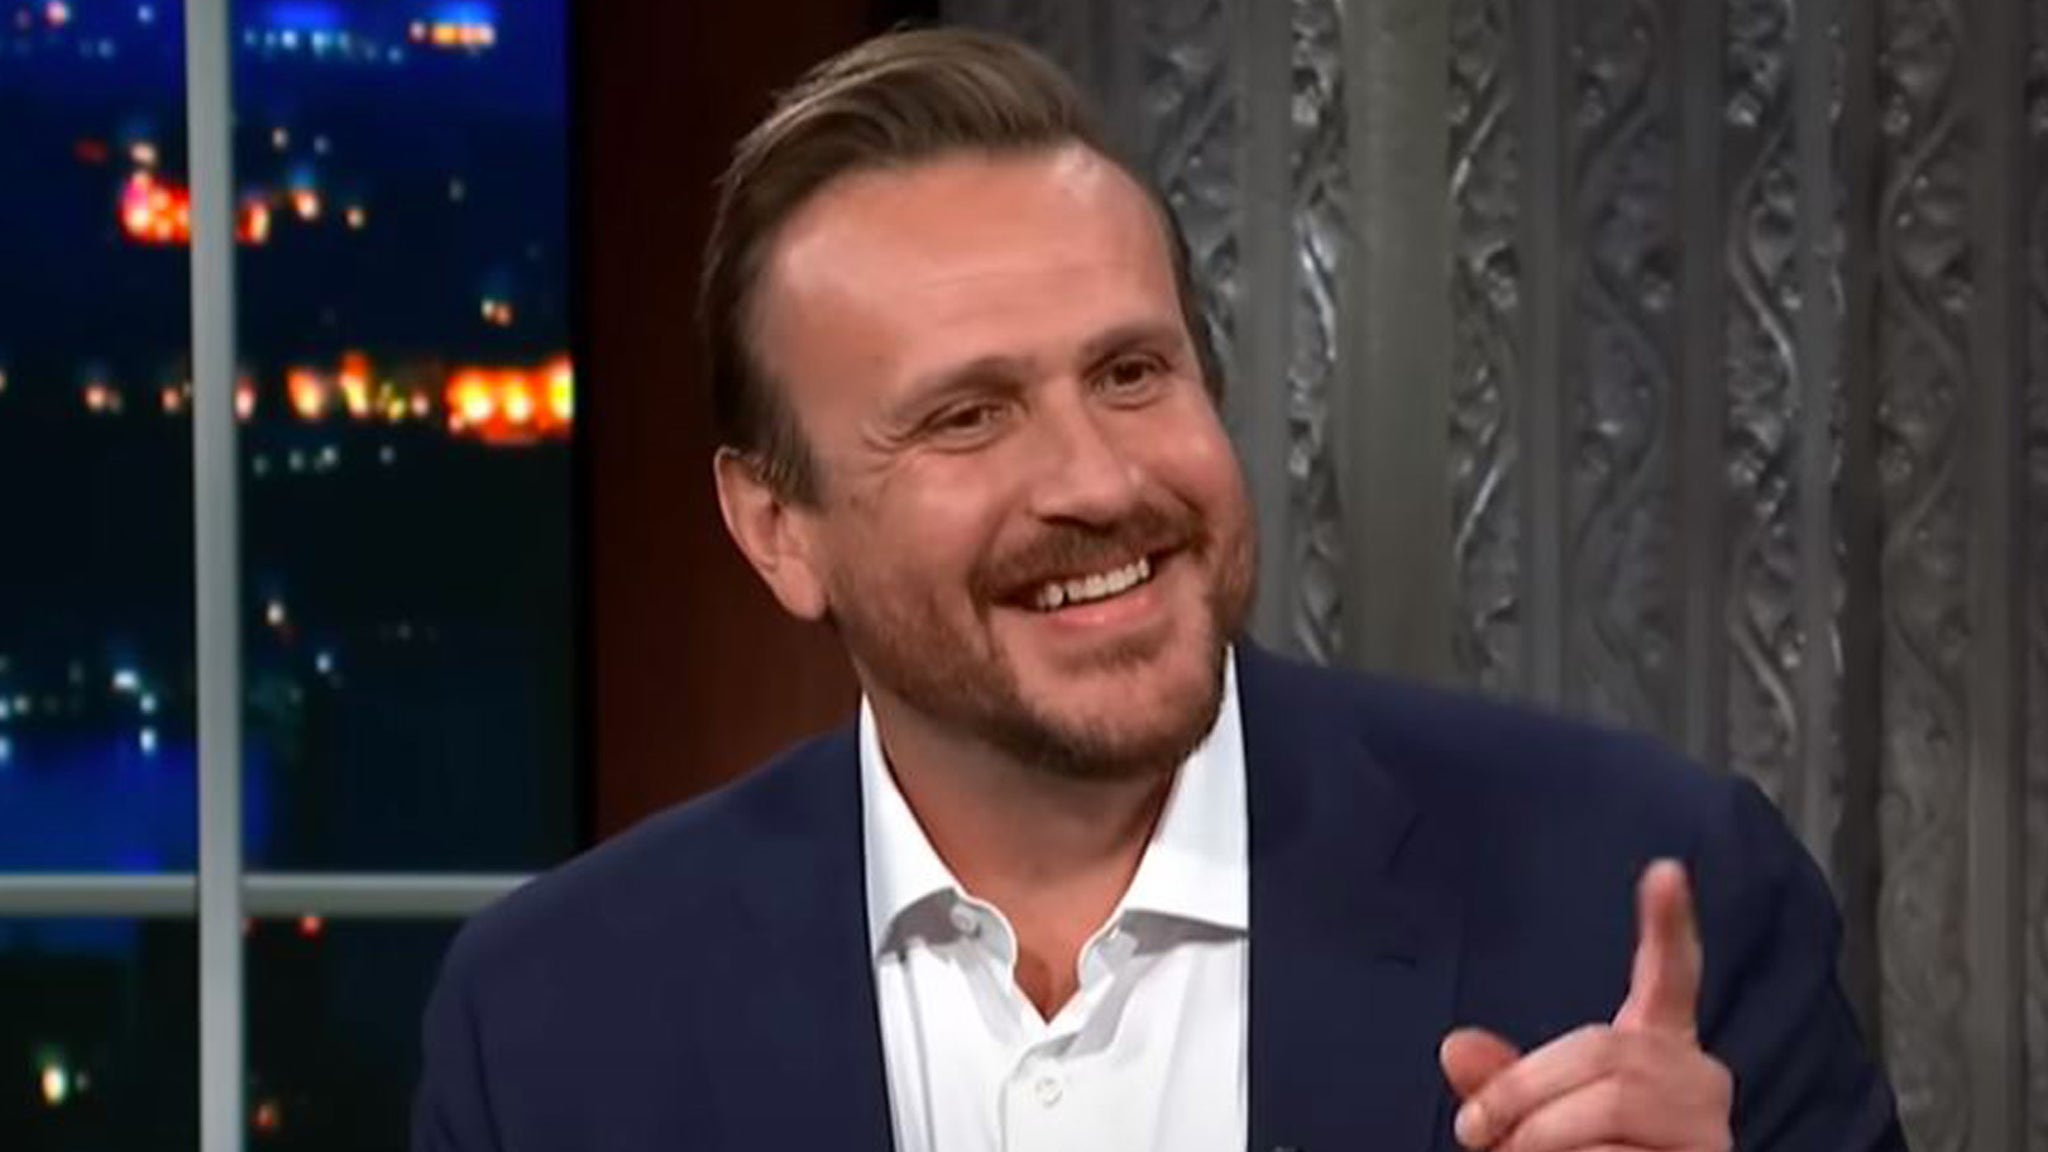 Jason Segel’s Real-Life Meet Cute Story Will Break Your Heart in a Totally Unexpected Way